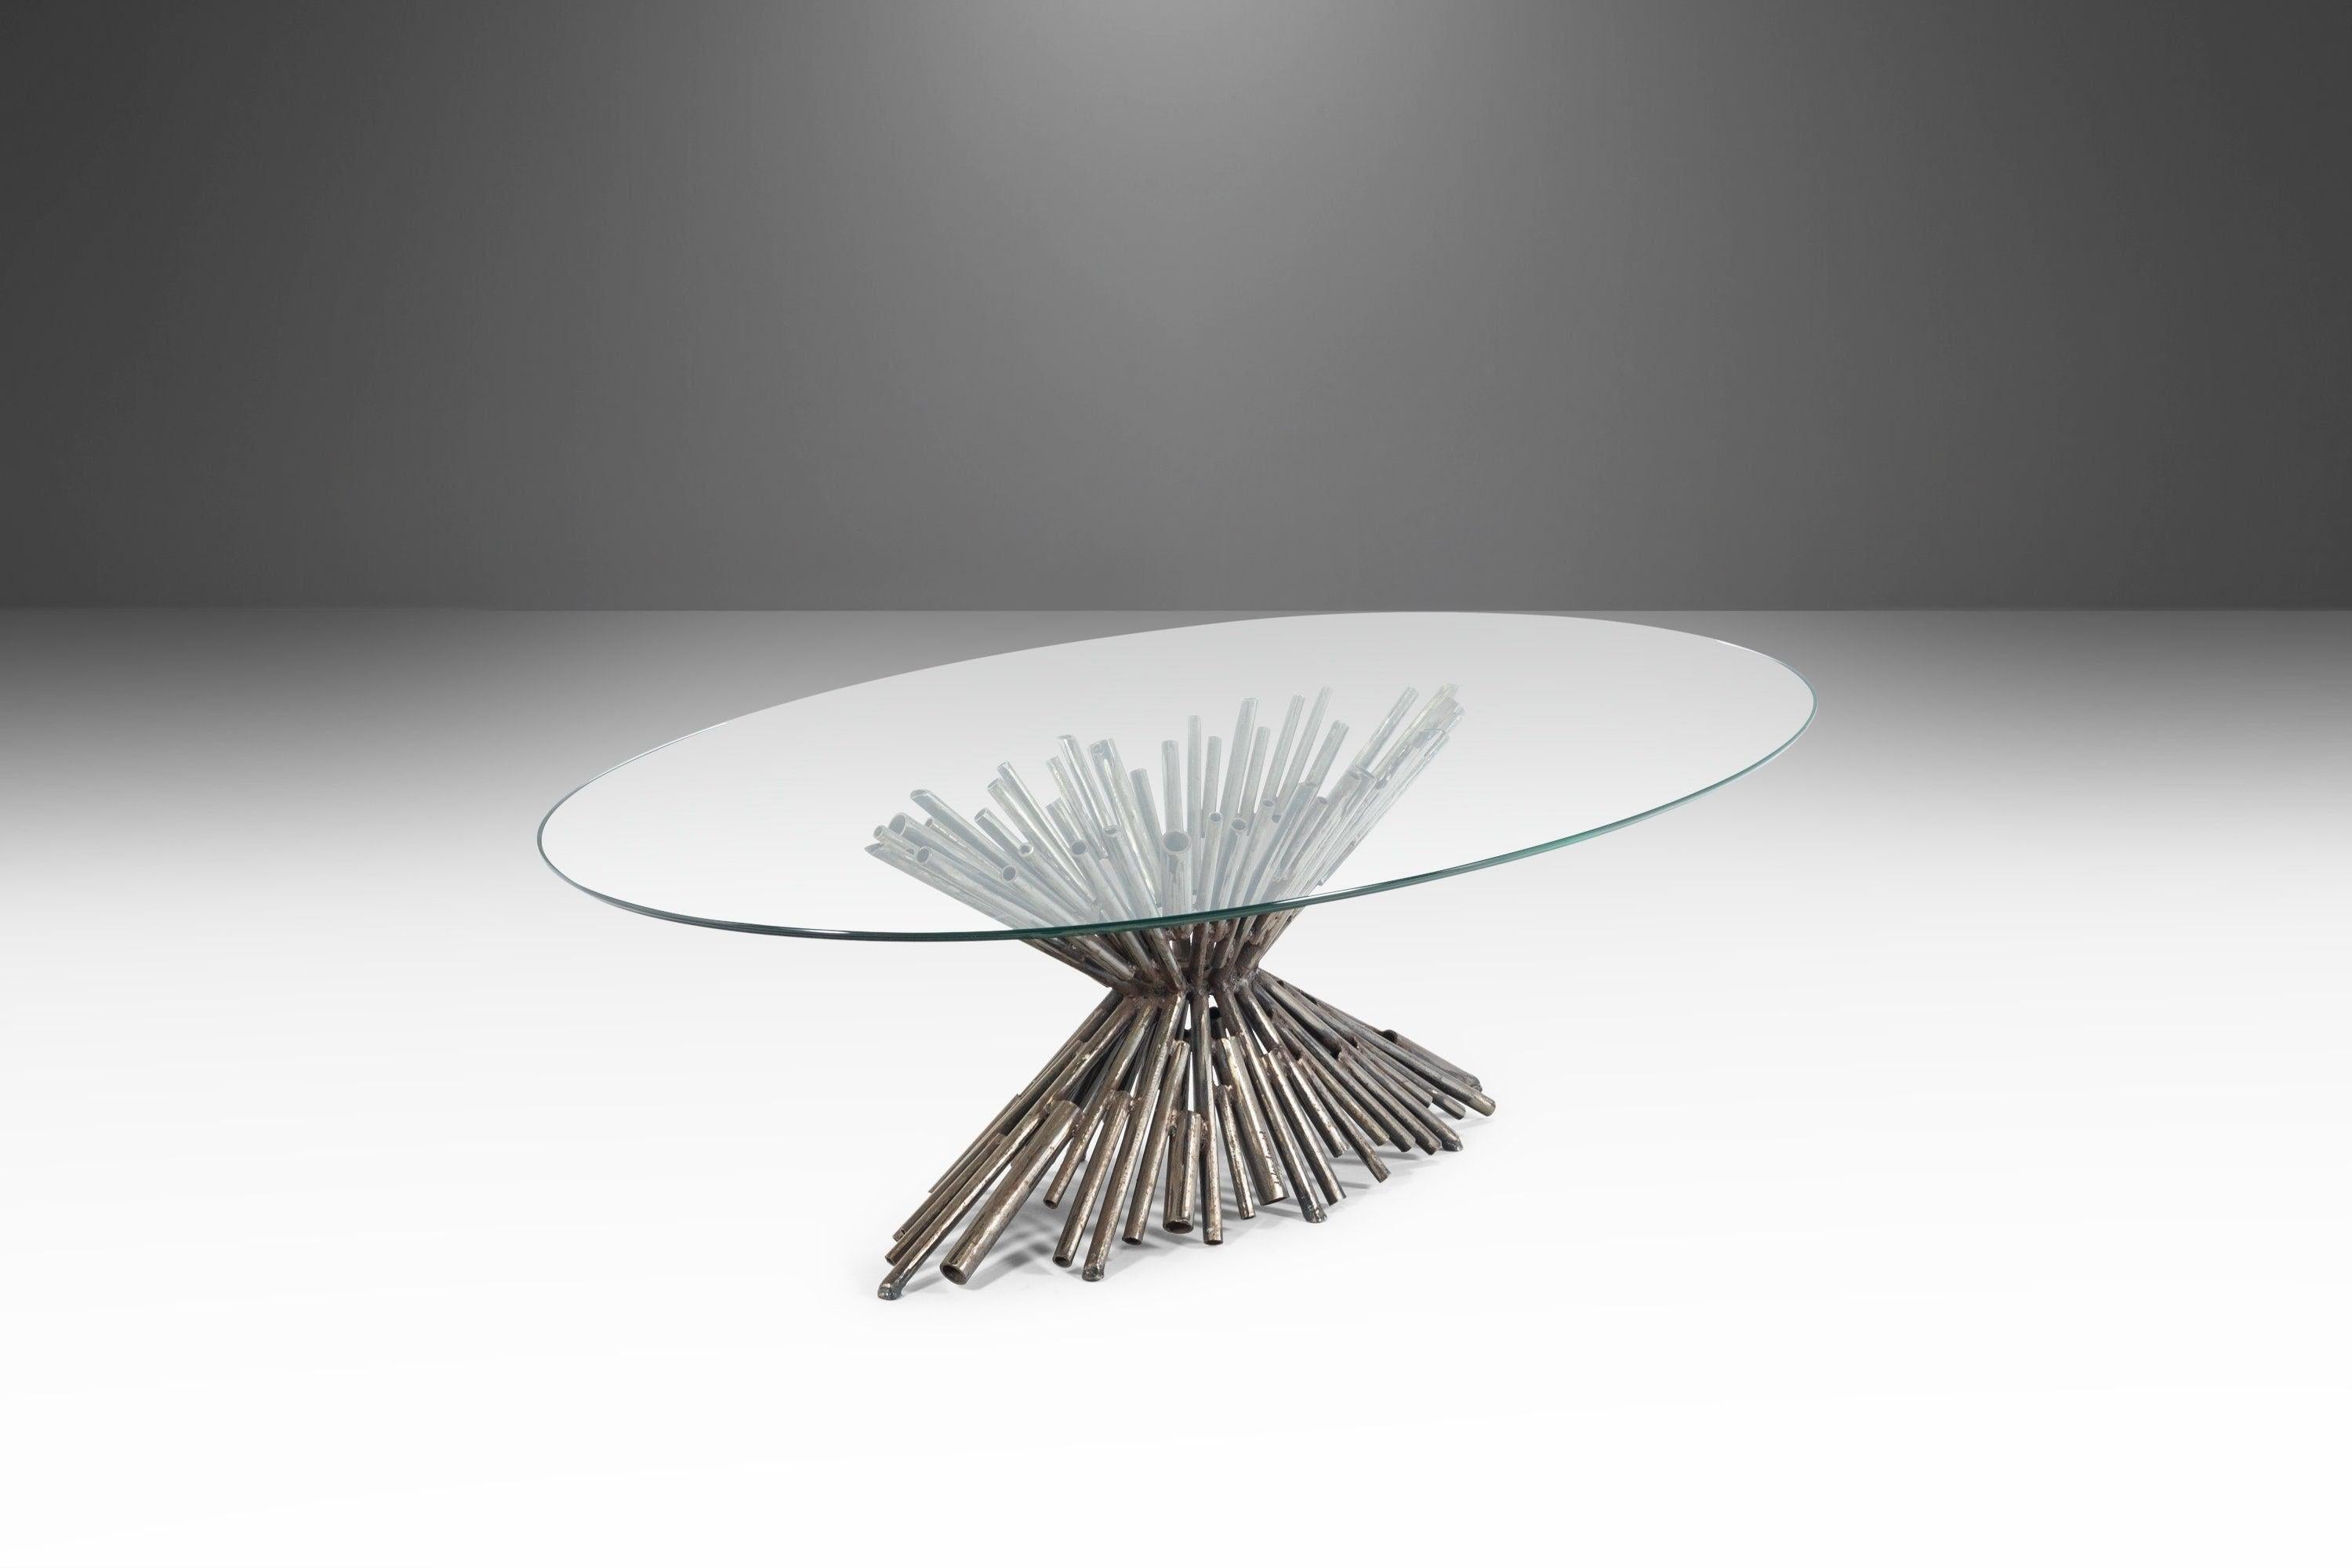 Mid-Century Modern Brutalist Tubular Steel Coffee Table with a Glass Top by Silas Seandel, c. 1970 For Sale